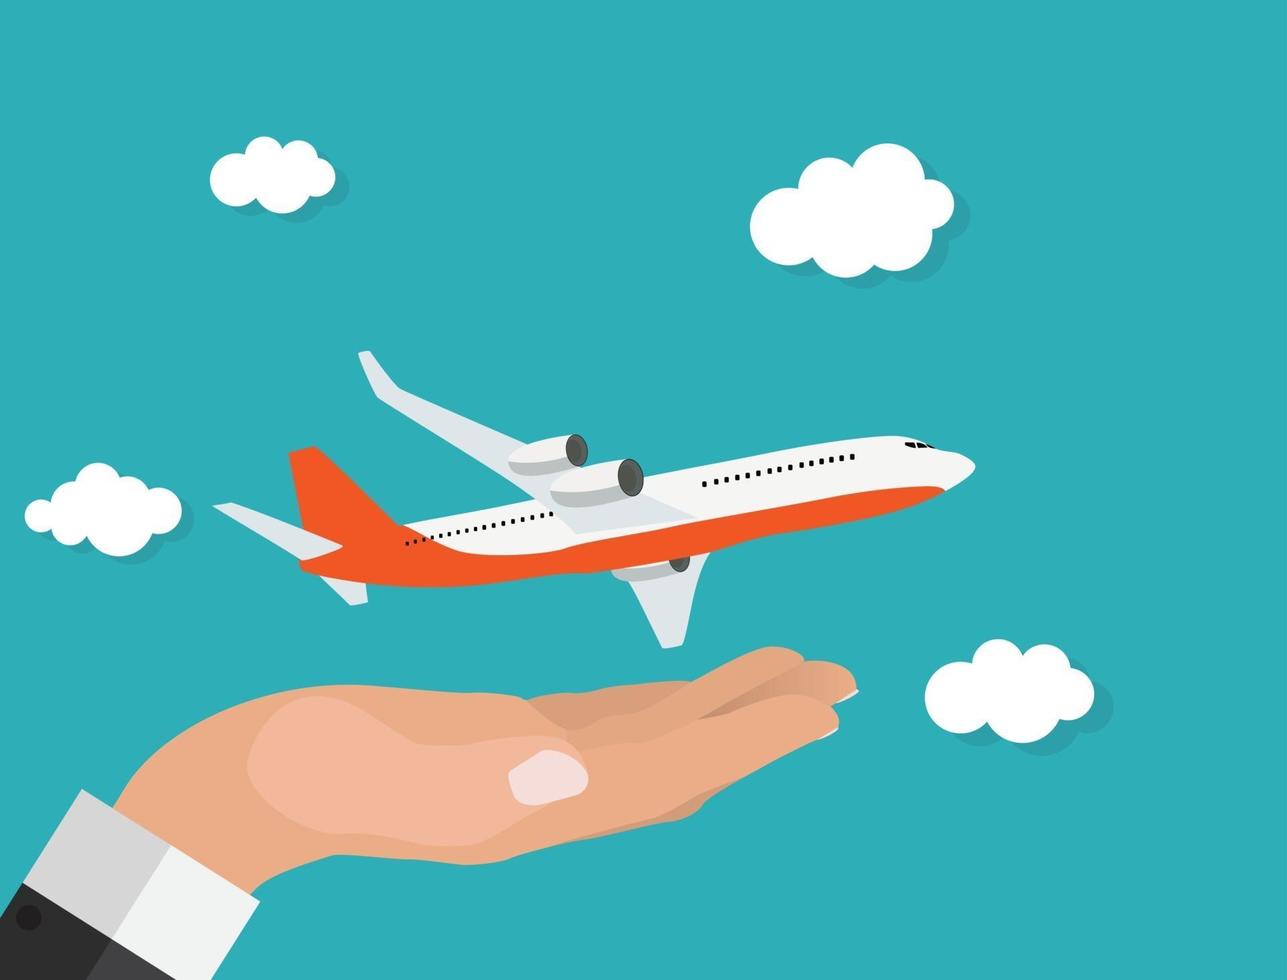 Abstract Airplane Background with Hand Vector Illustration